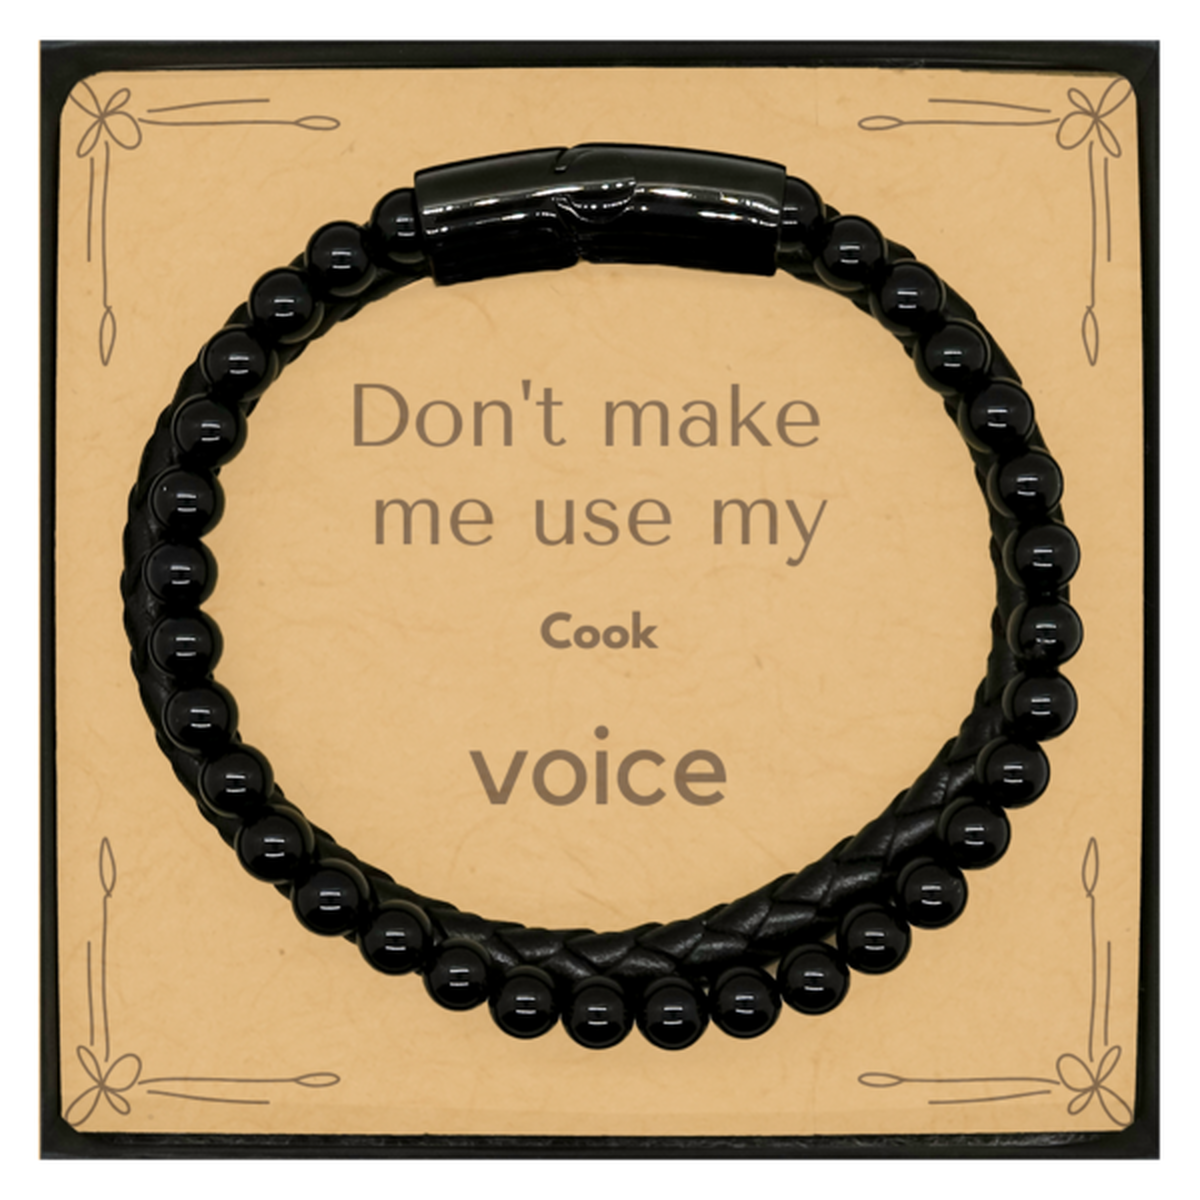 Don't make me use my Cook voice, Sarcasm Cook Card Gifts, Christmas Cook Stone Leather Bracelets Birthday Unique Gifts For Cook Coworkers, Men, Women, Colleague, Friends